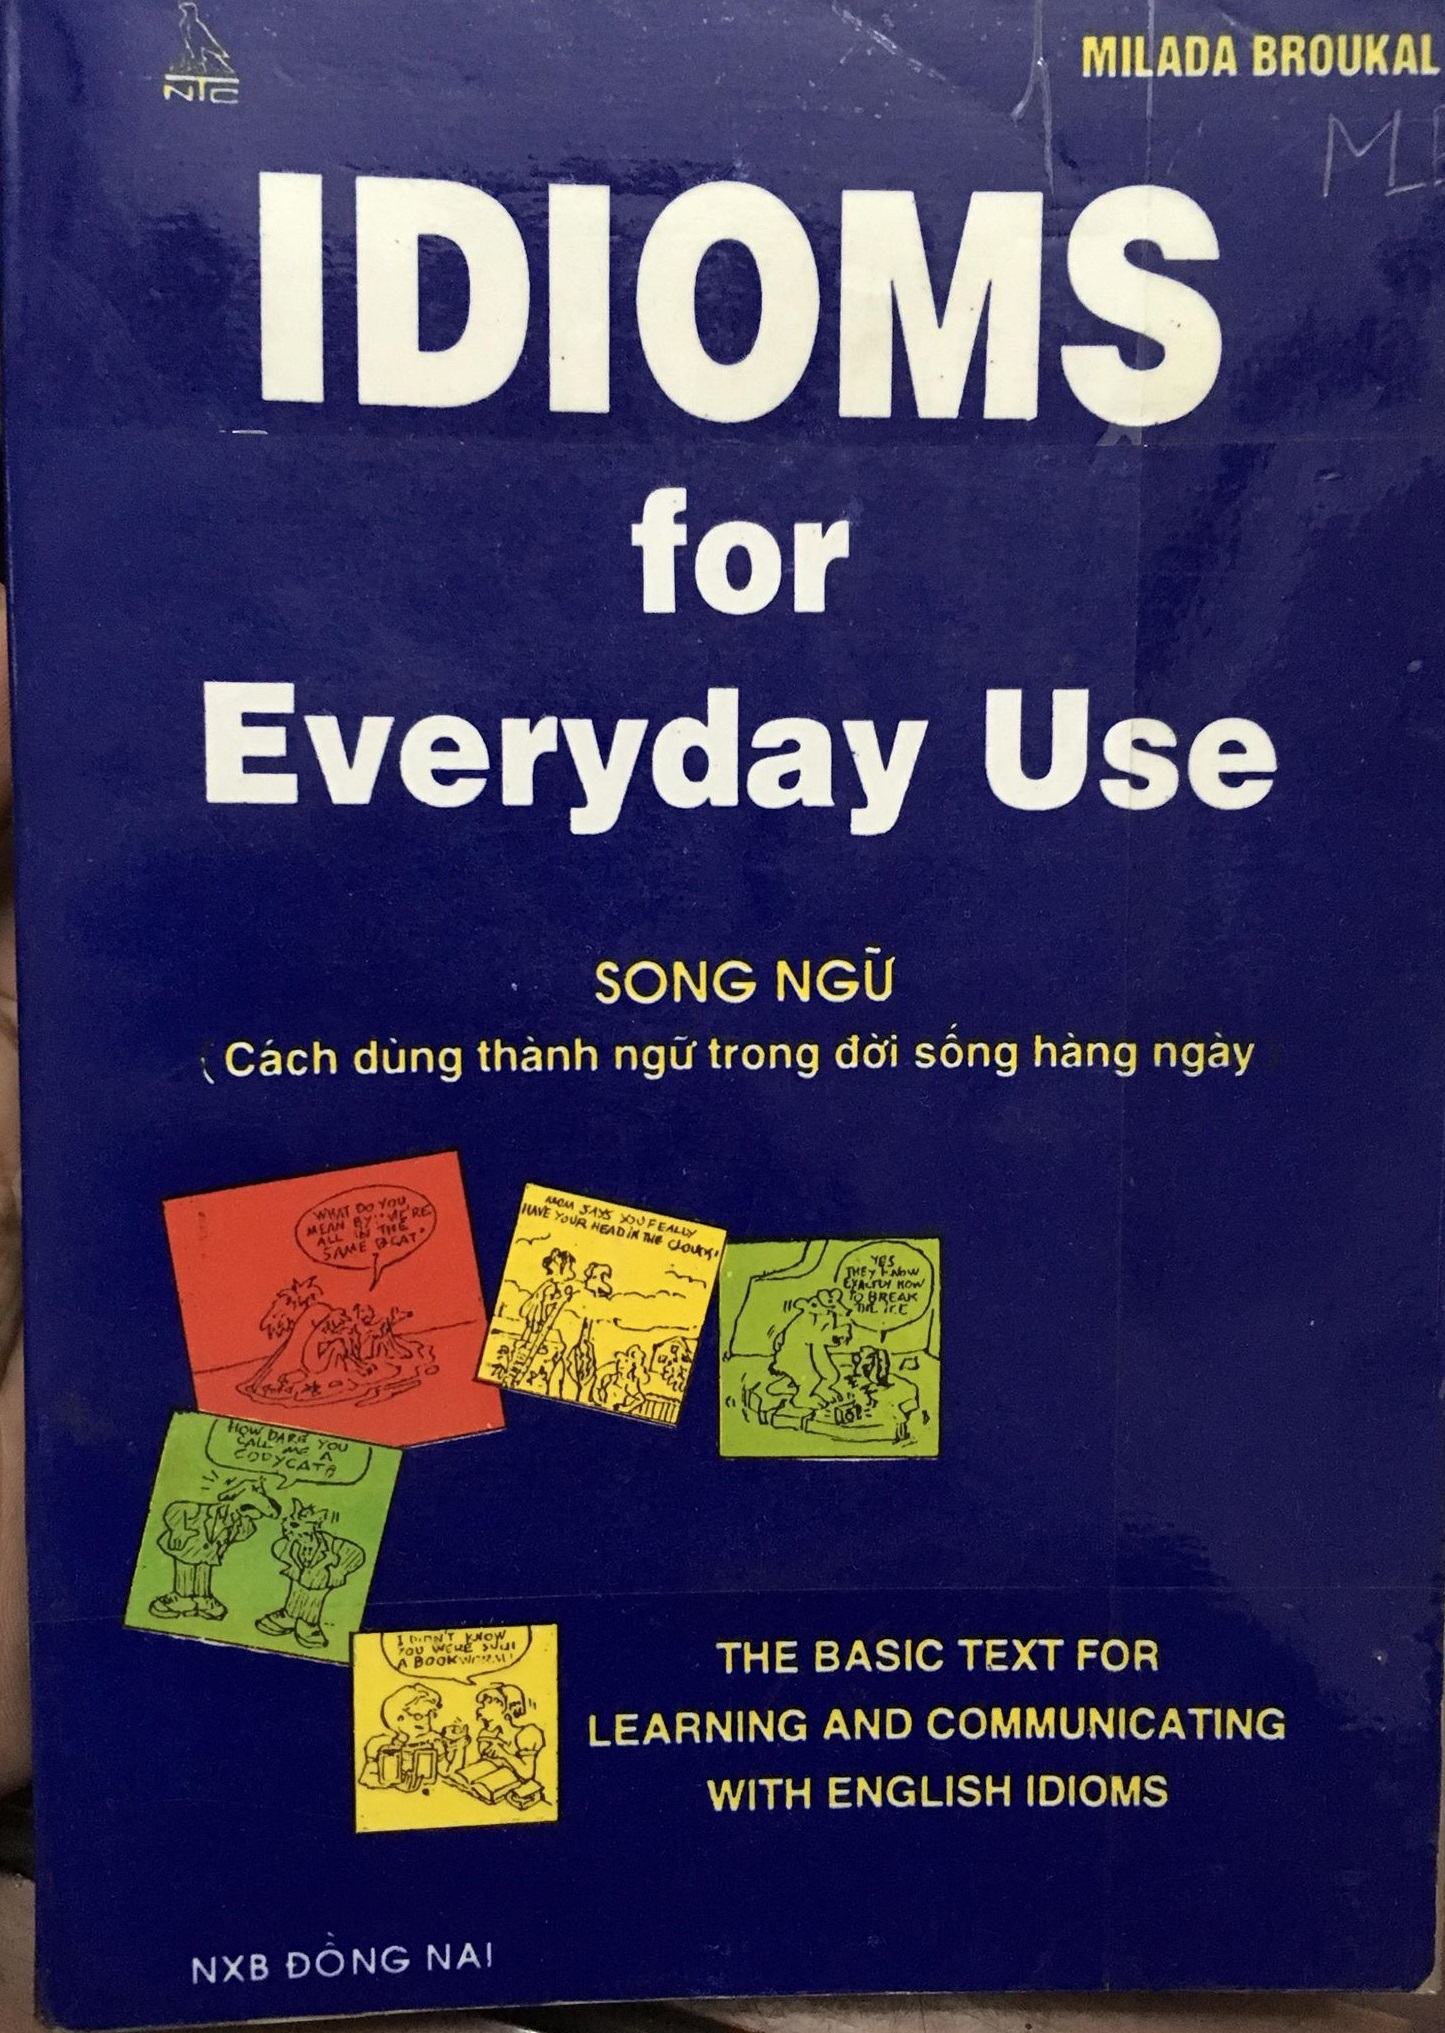 Idioms for everyday use (song ngữ) by Milada Broukal